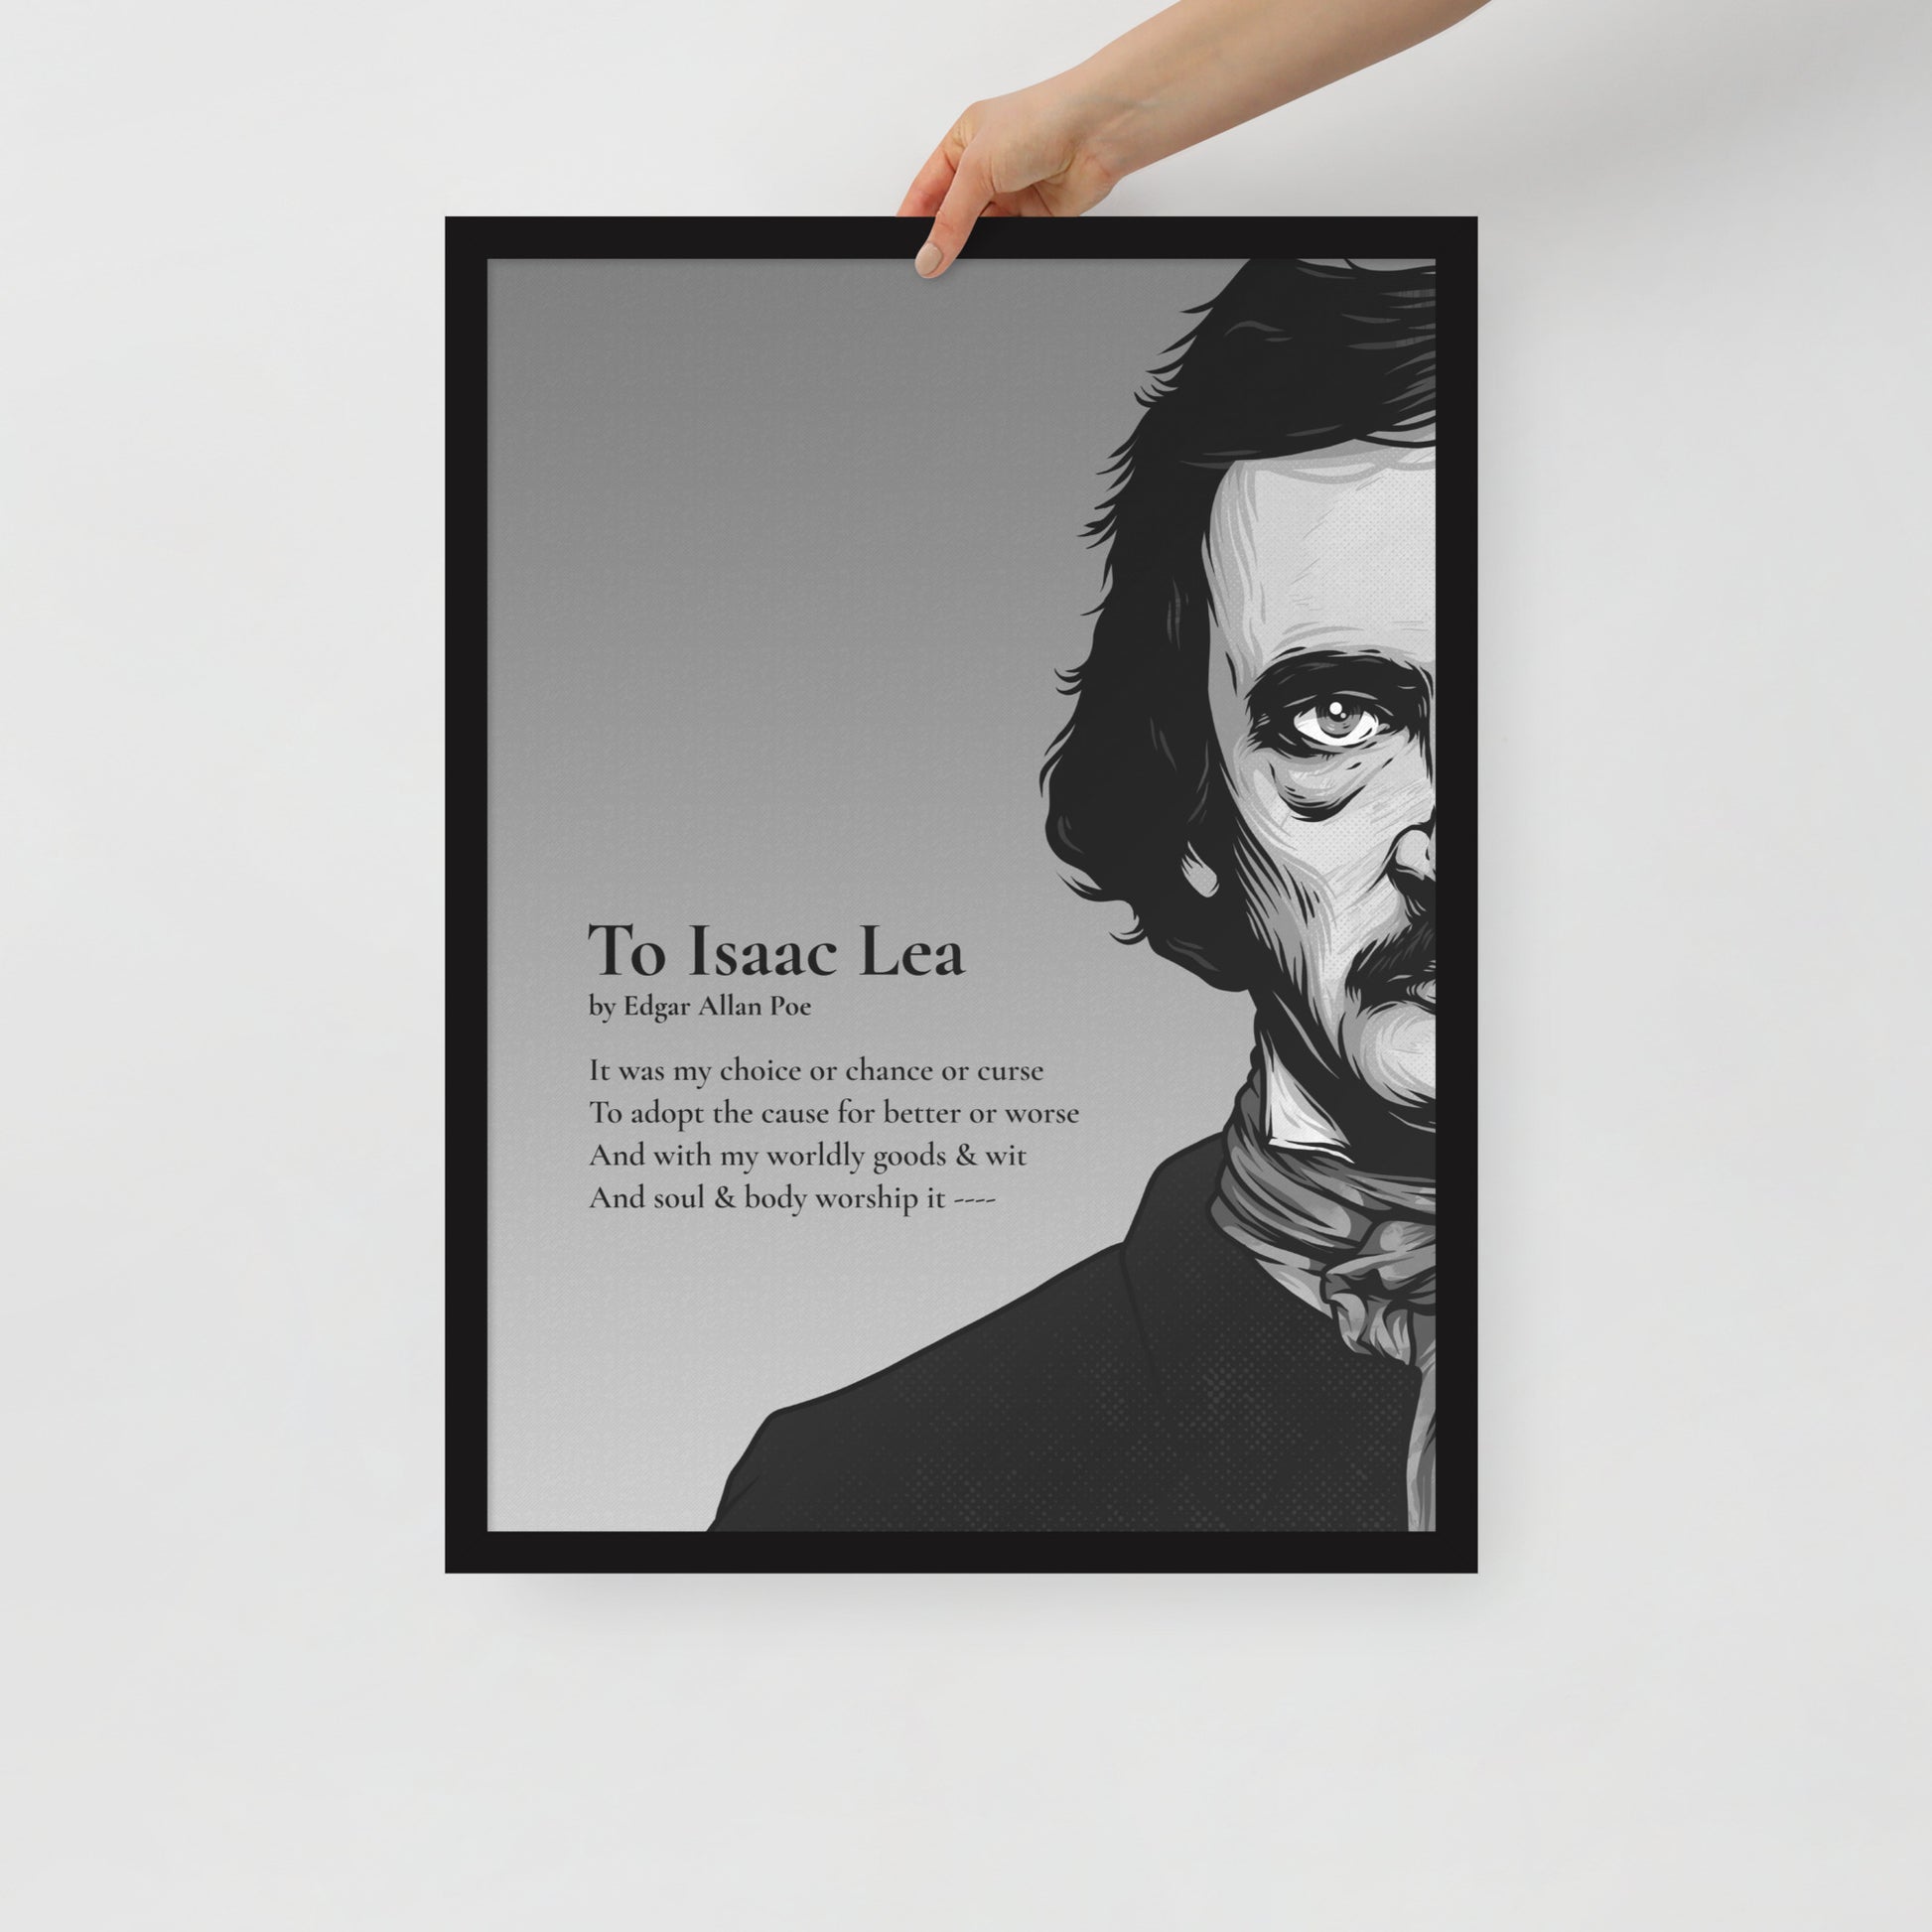 Edgar Allan Poe's 'To Isaac Lea' Framed Matted Poster - 18 x 24 Black Frame